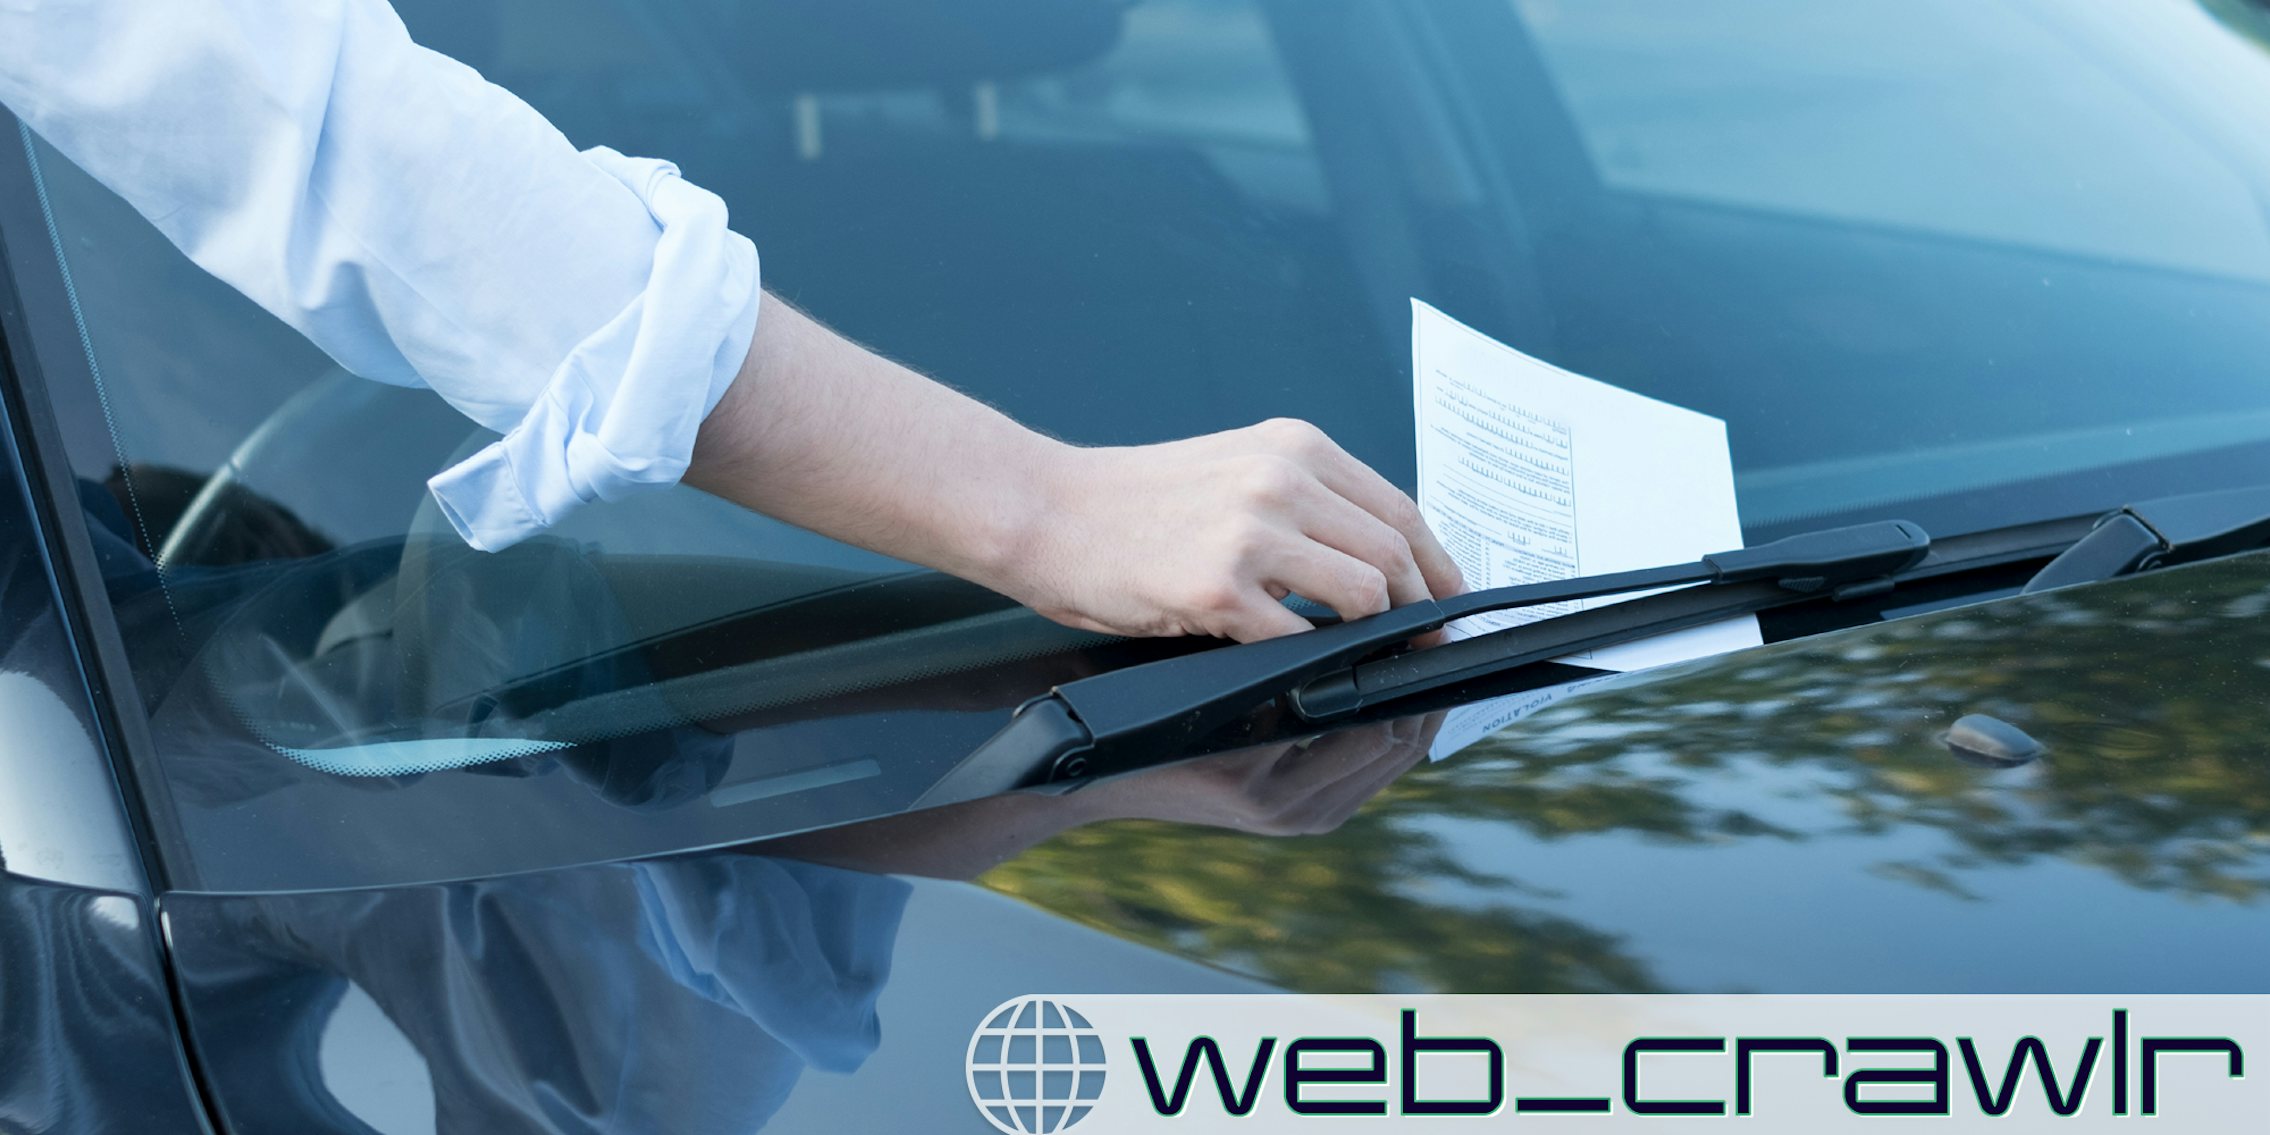 A person grabbing a parking ticket under a windshield wiper. The Daily Dot newsletter web_crawlr logo is in the bottom right corner.